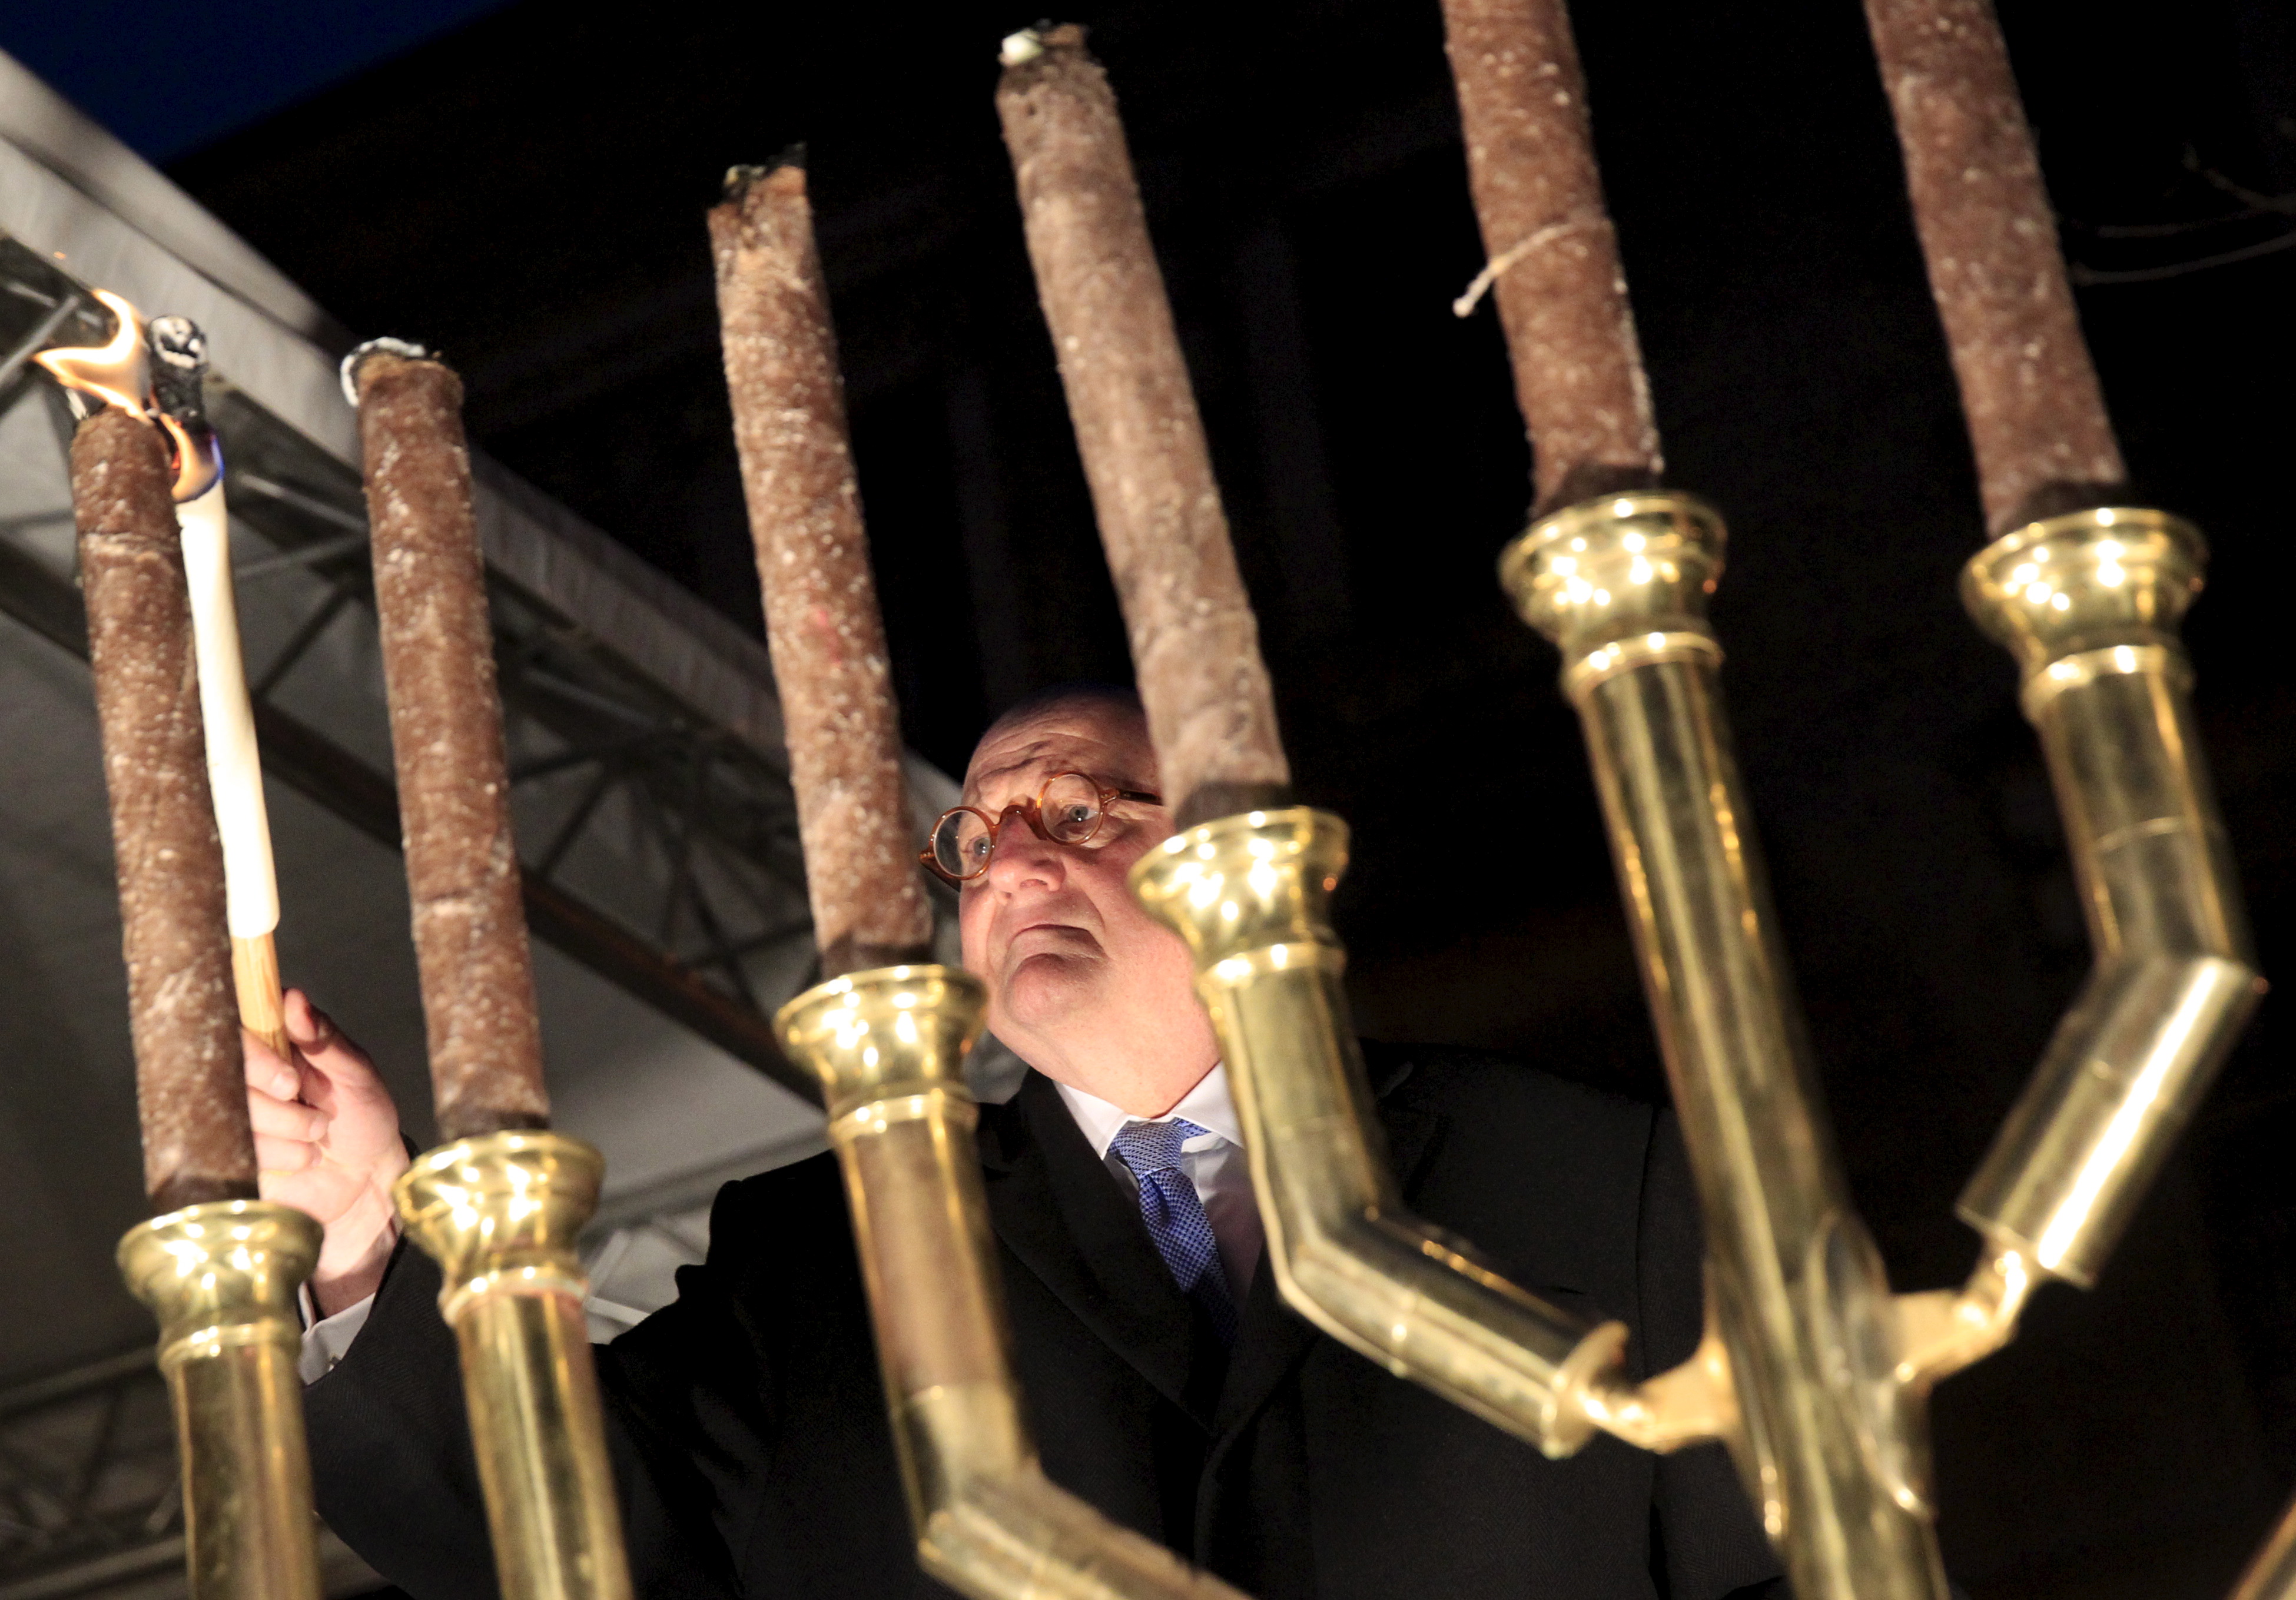 Ira Forman, U.S. special envoy of the Office to Monitor and Combat Anti-Semitism, lights a menorah during a protest organized by a Jewish group against a planned statue of Balint Homan in Szekesfehervar, Hungary, on Dec. 13, 2015 (Bernadett Szabo—Reuters)